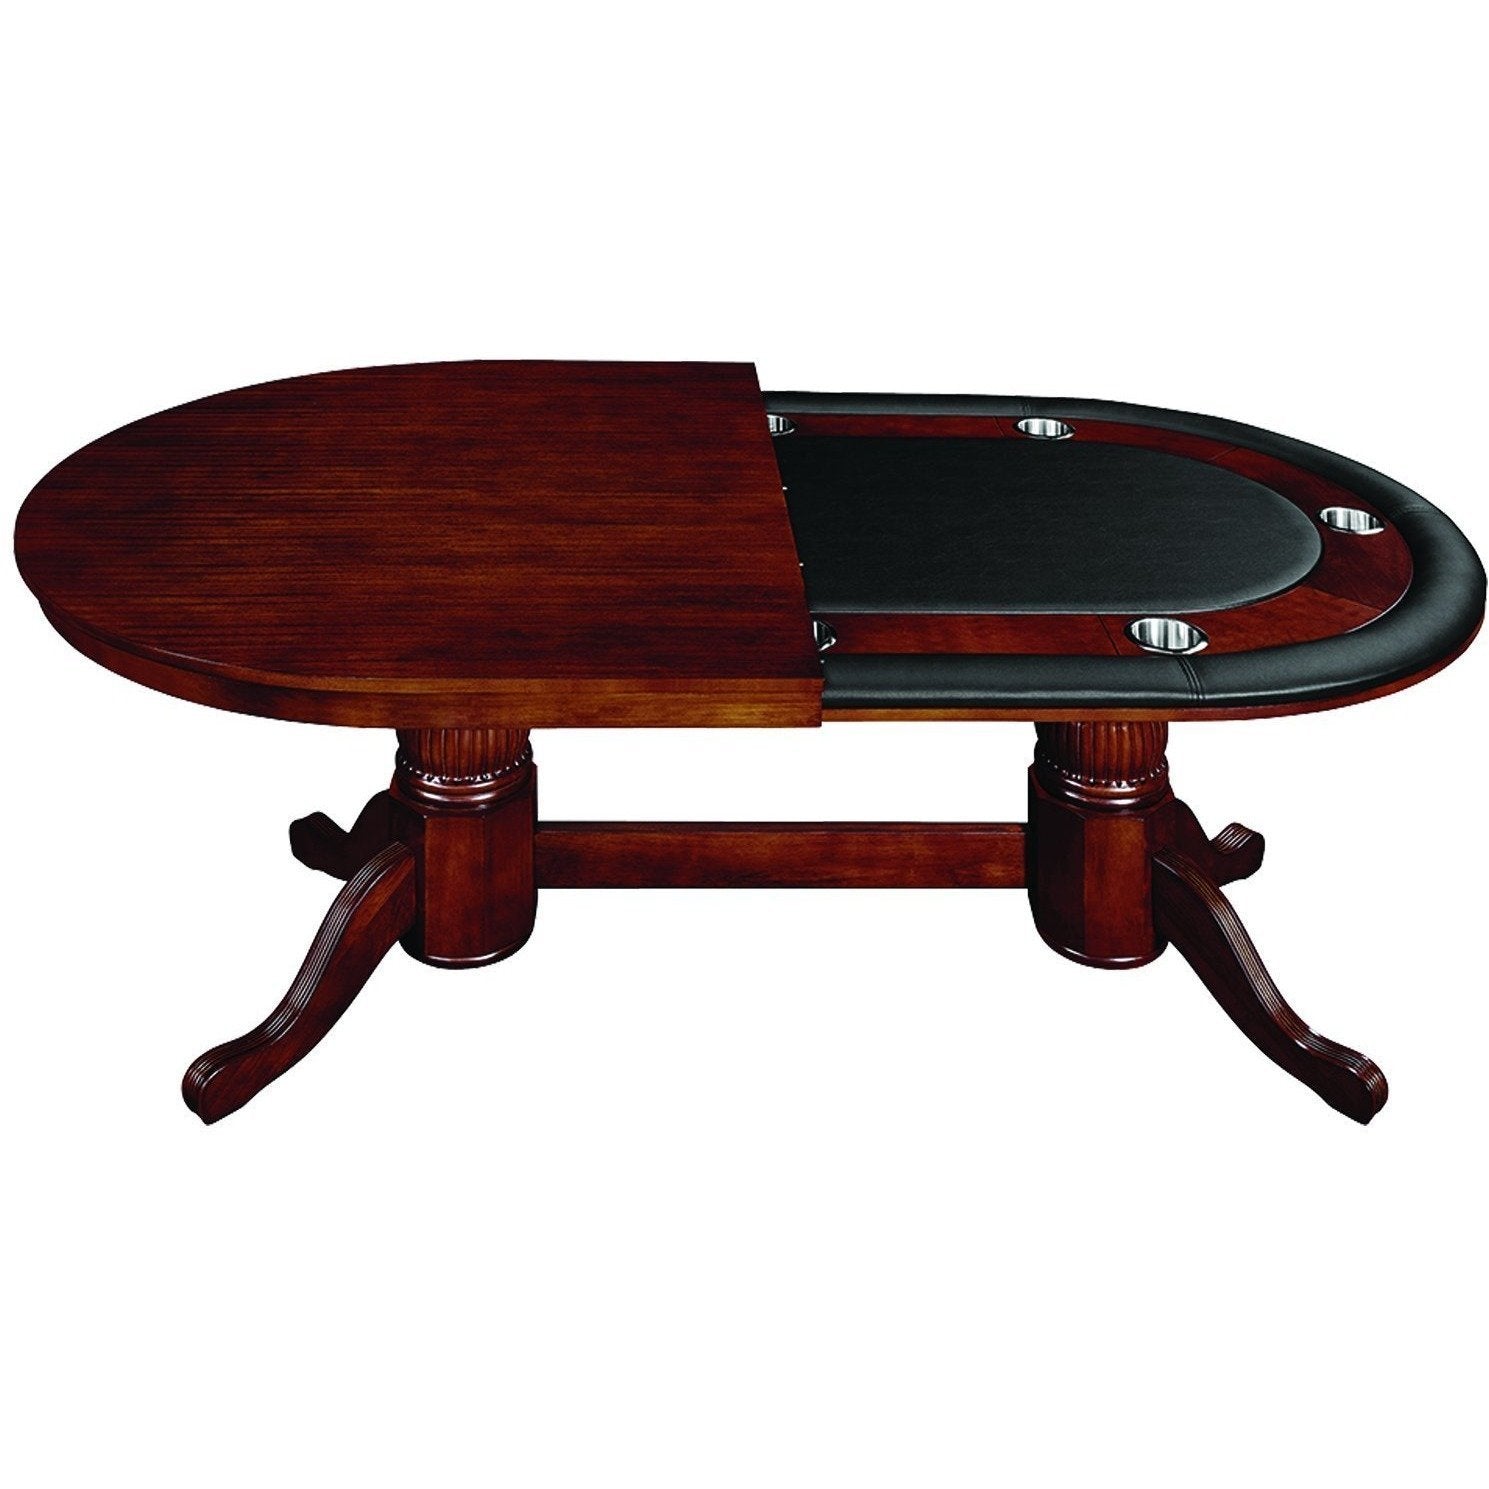 ram game room gtbl84-wt texas holdem game table English Tudor with dining top half cover